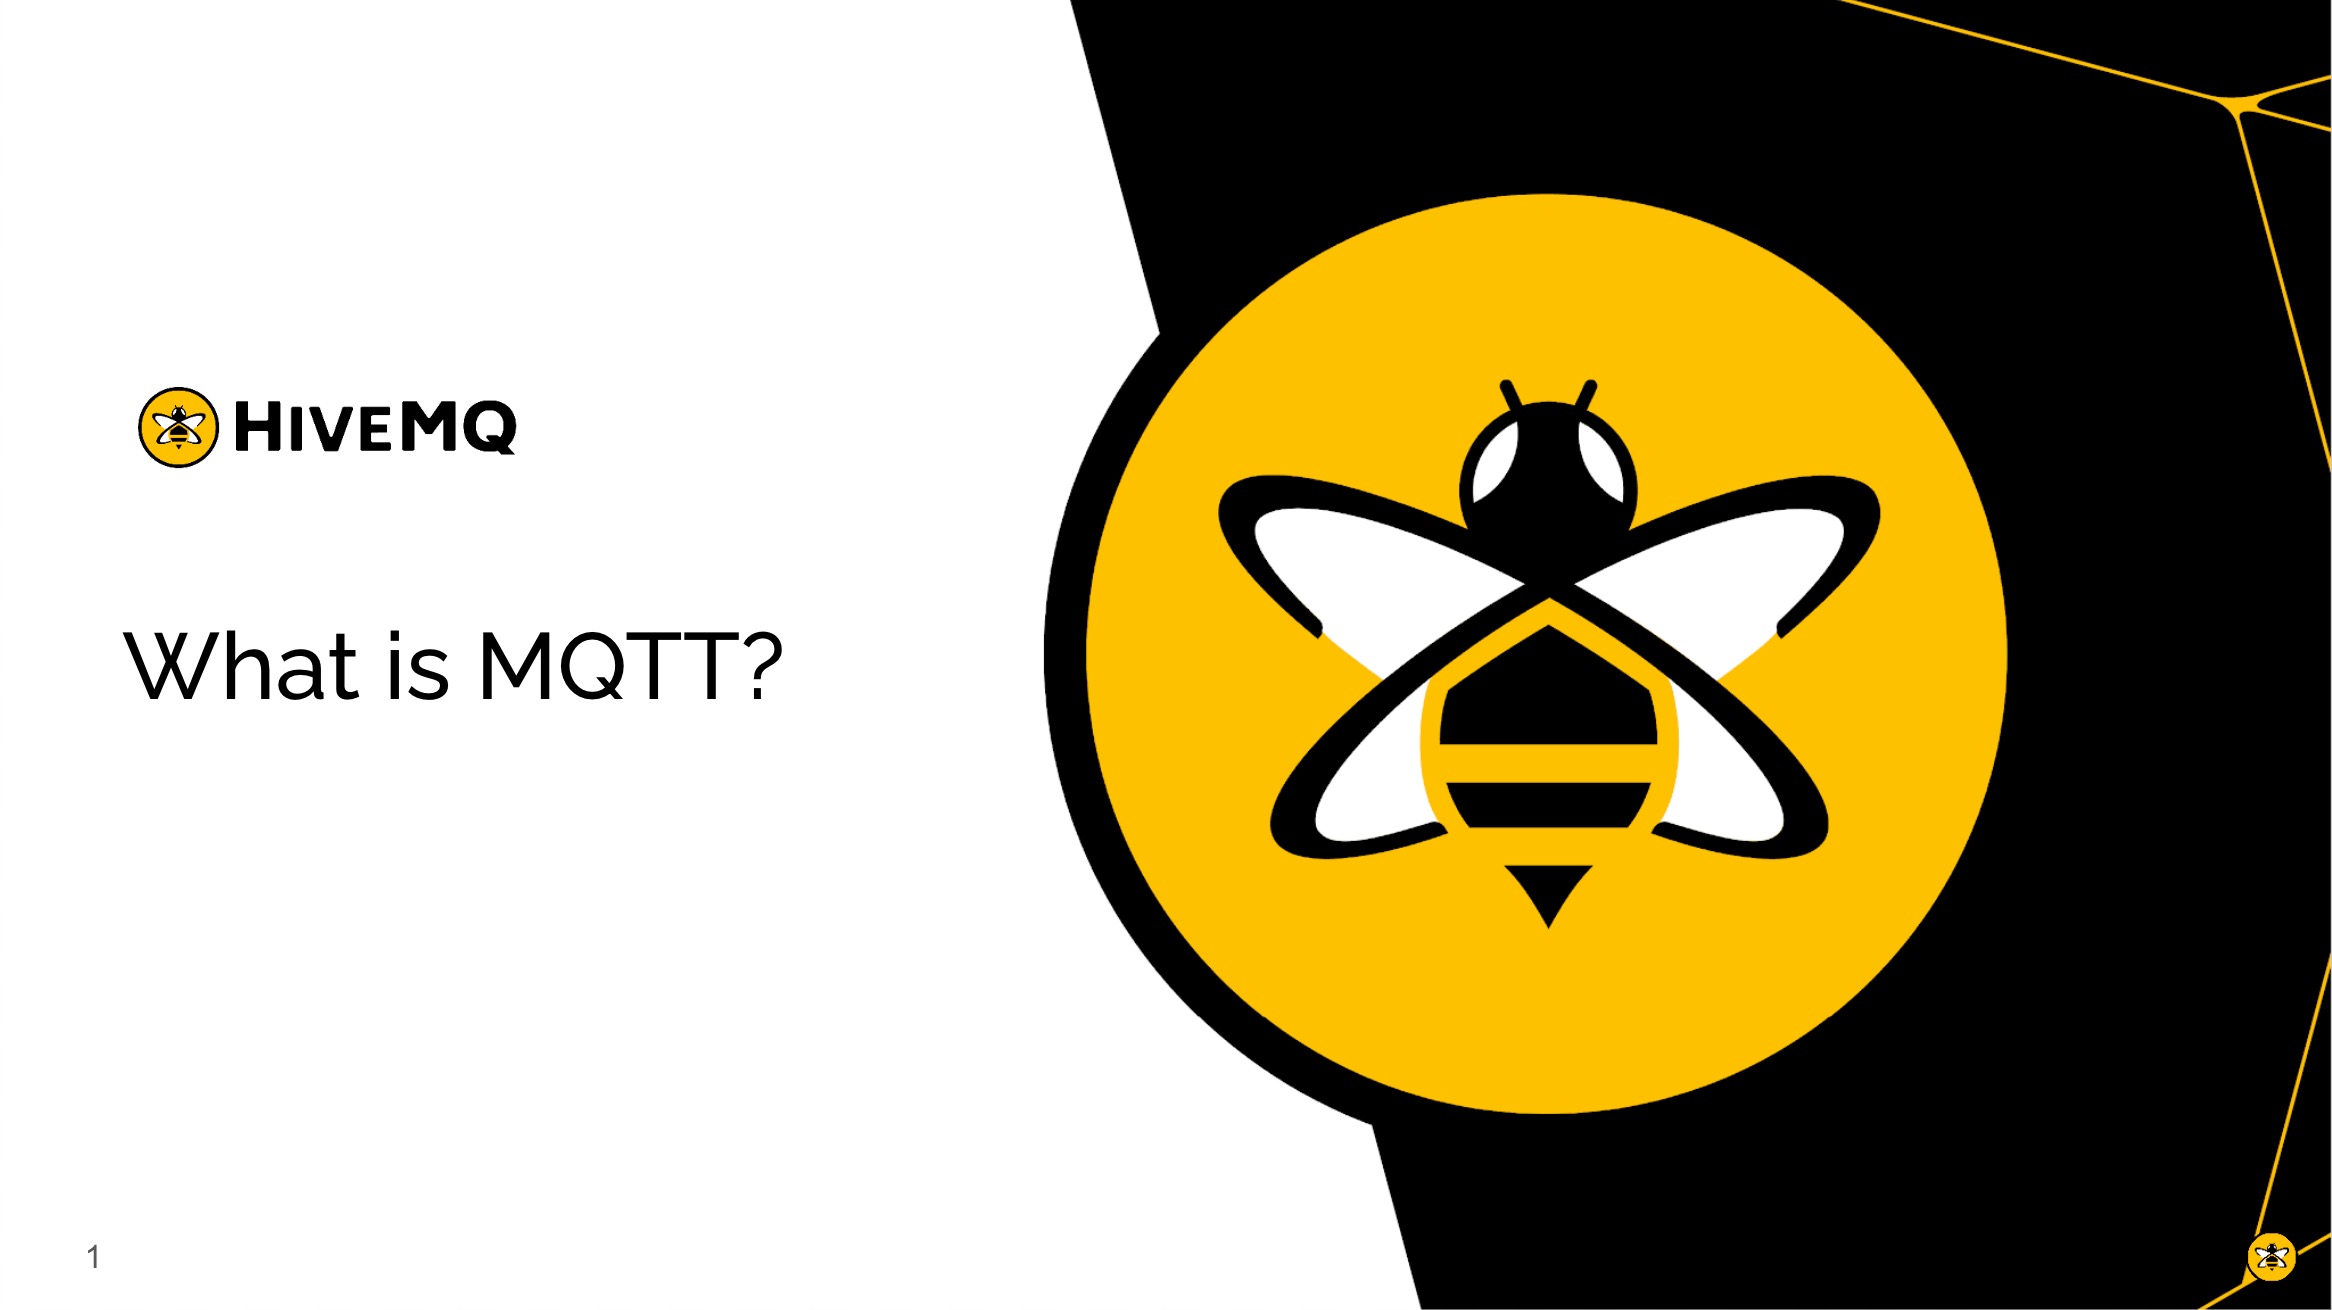 MQTT Basics: What is MQTT and How Does it Work?